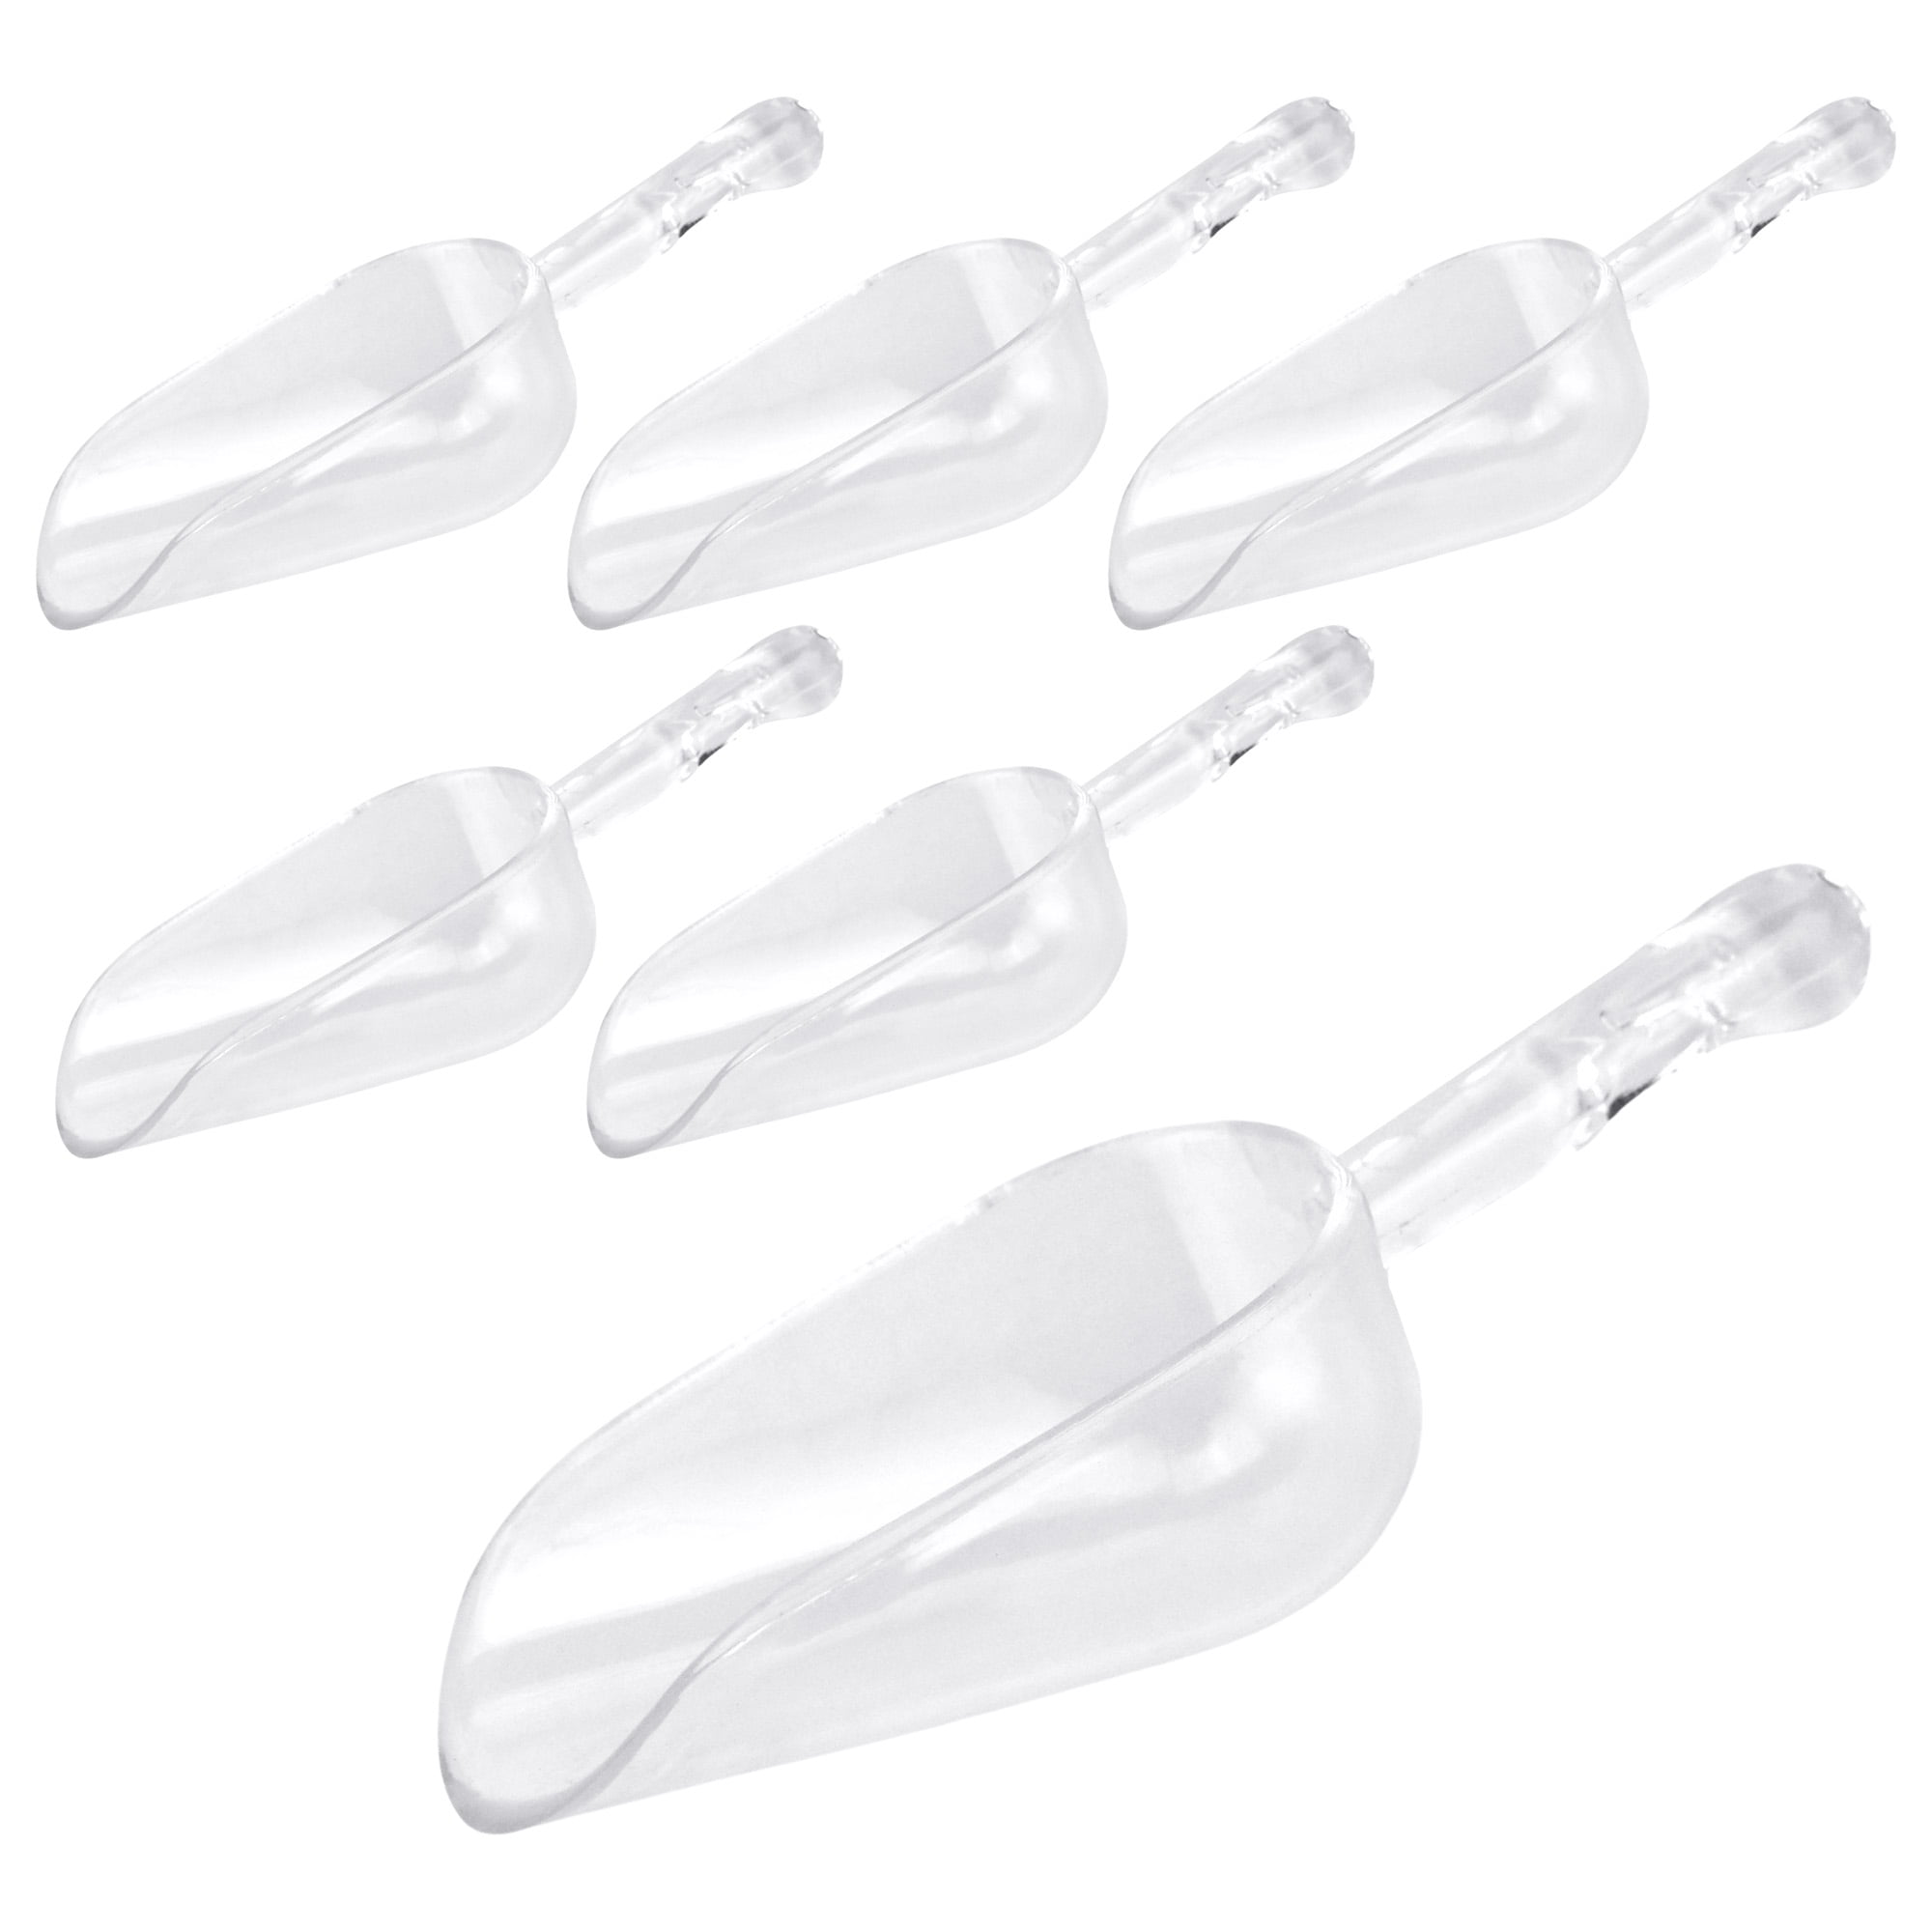  Small Plastic Candy Scoop, (12-pack) (3.25 x 1.75, Clear) :  Home & Kitchen